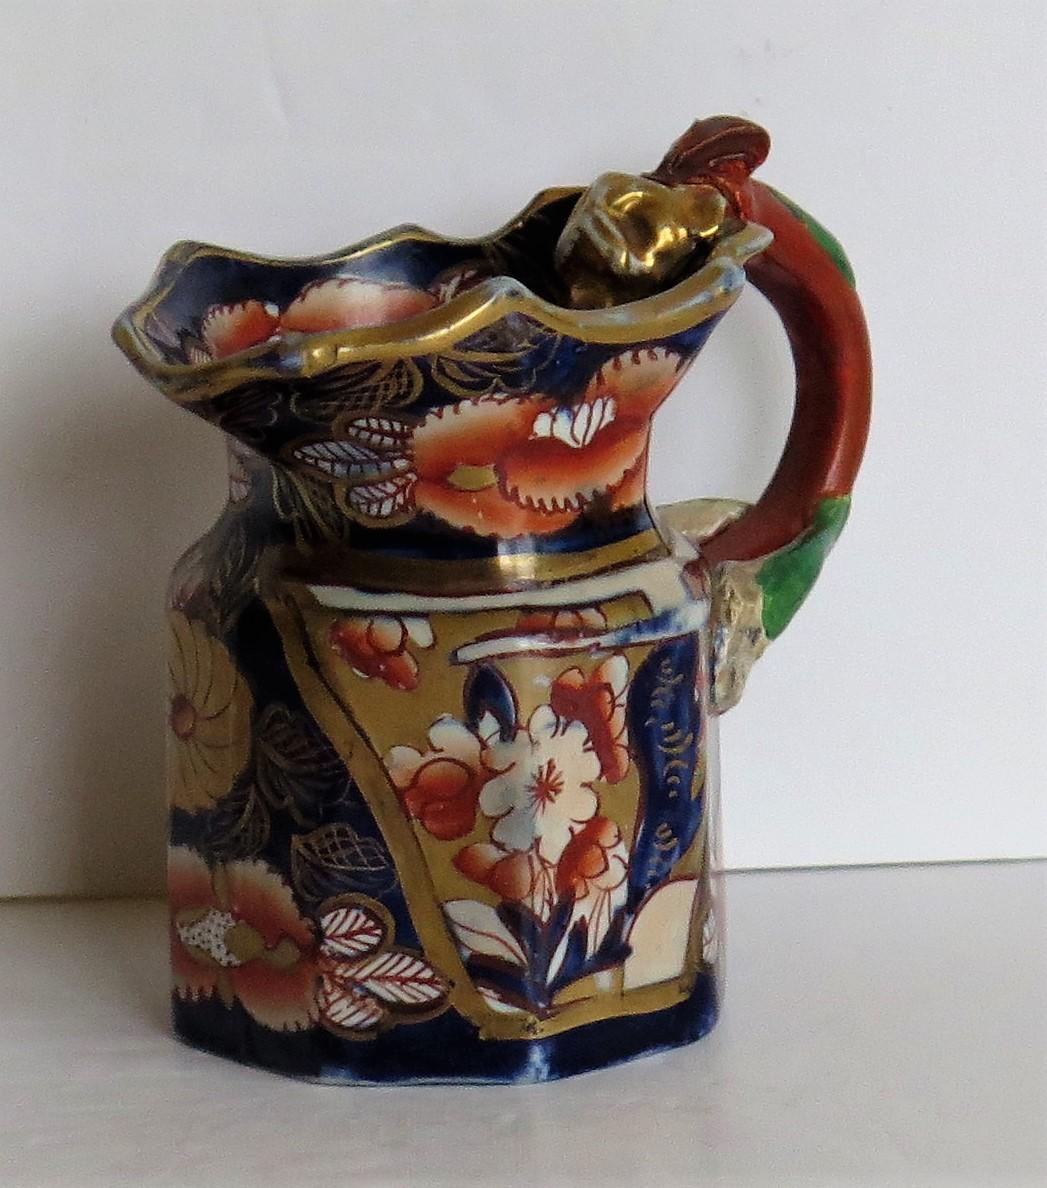 Early Mason's Ironstone Cream Jug or Pitcher in School House Pattern, circa 1820 4